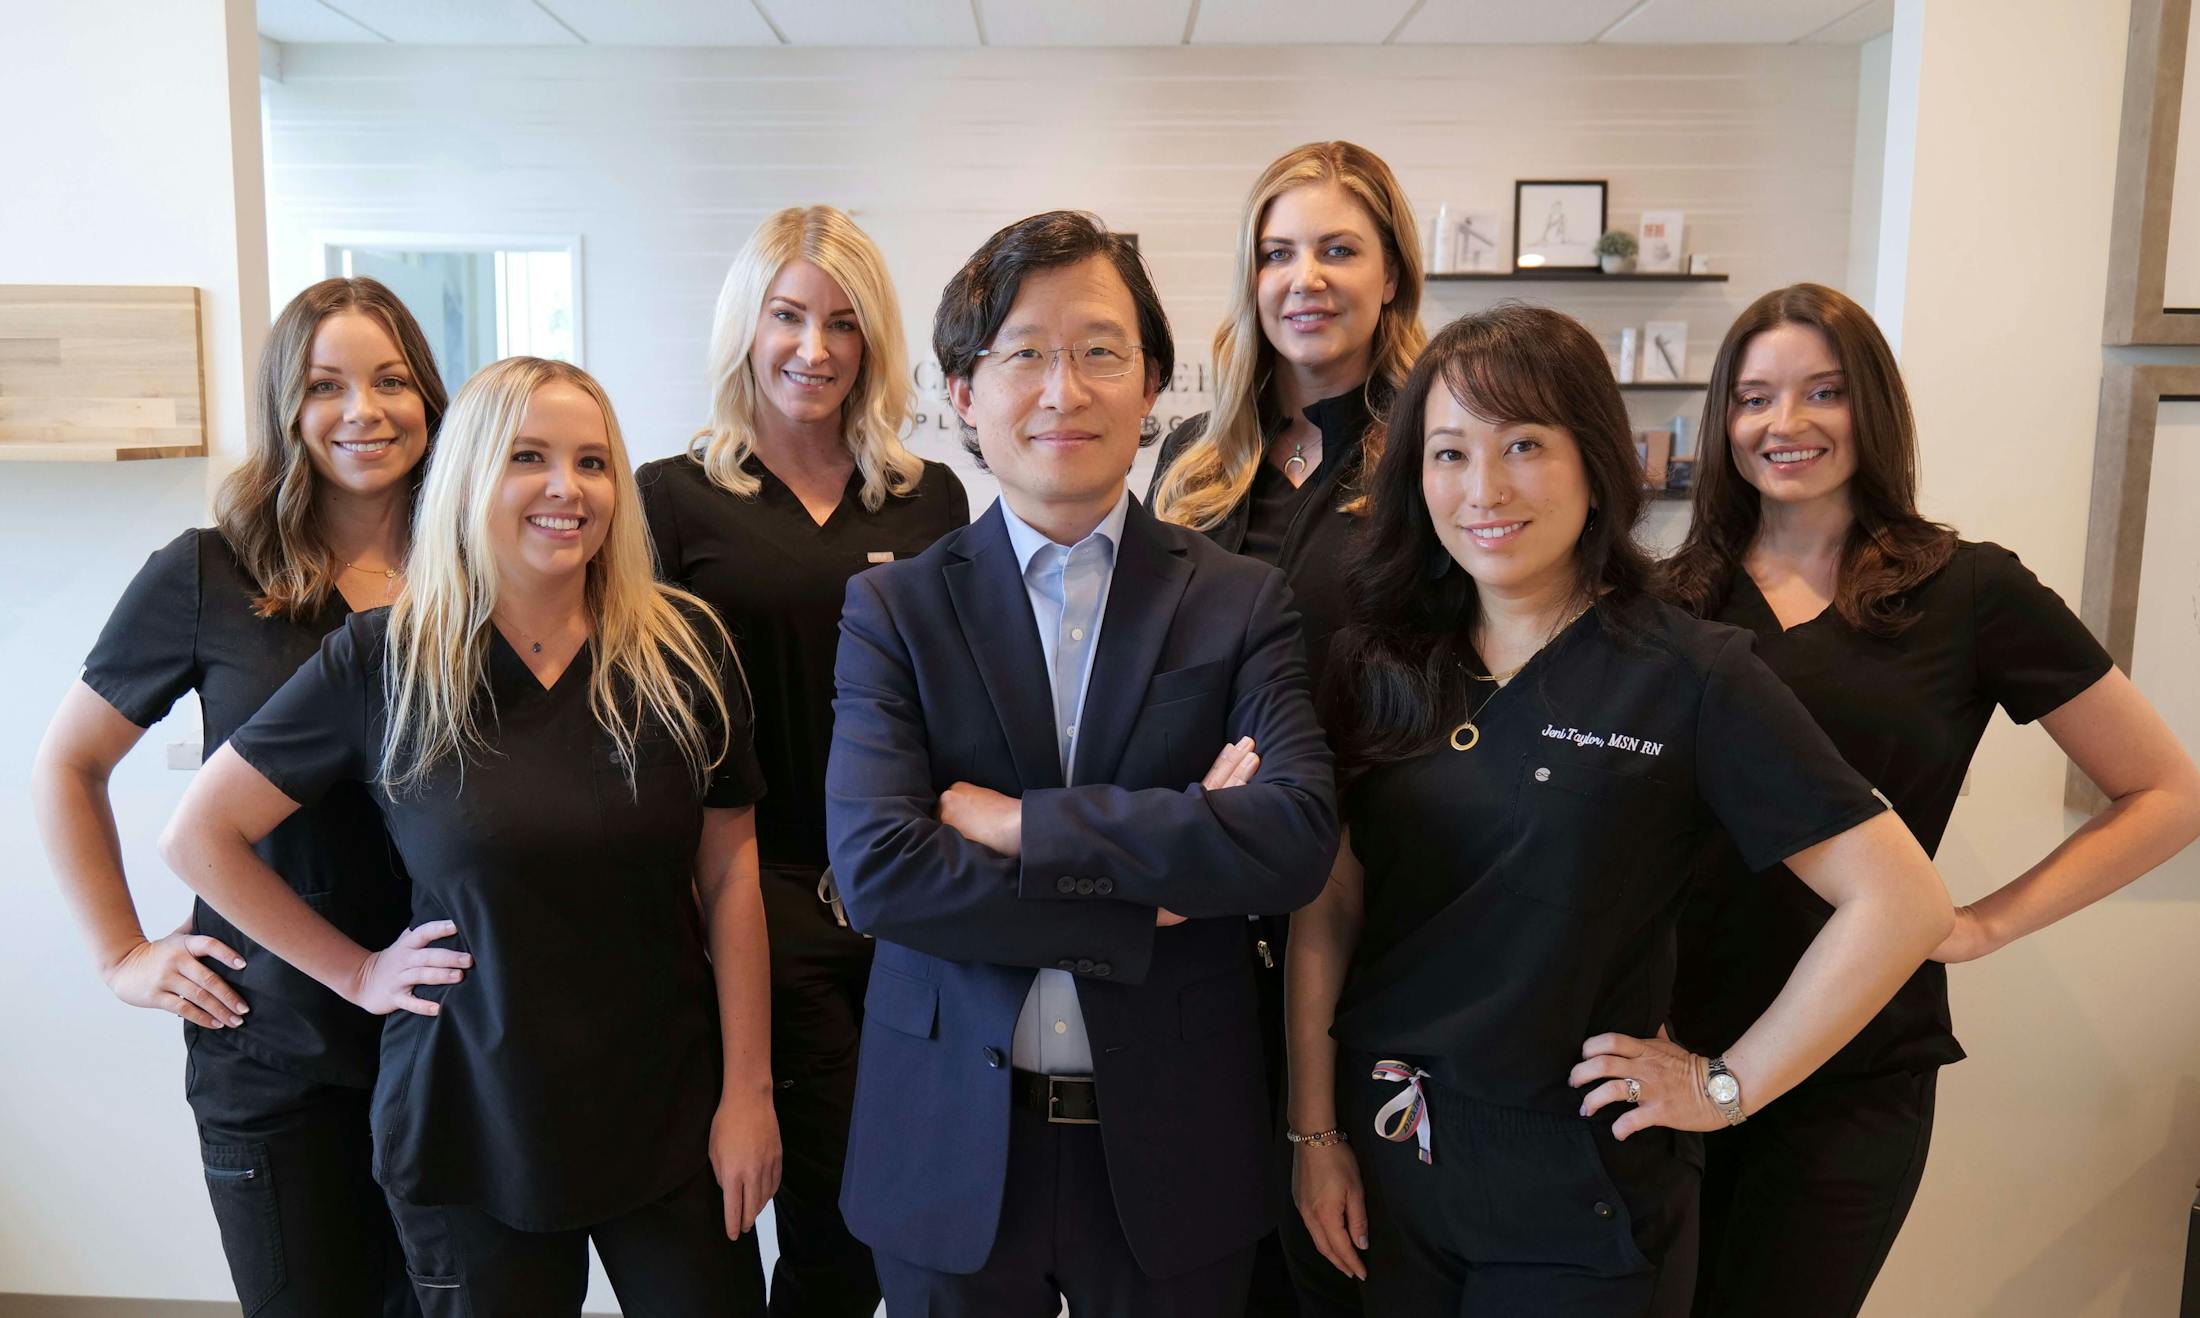 image of Dr. Lee with his team